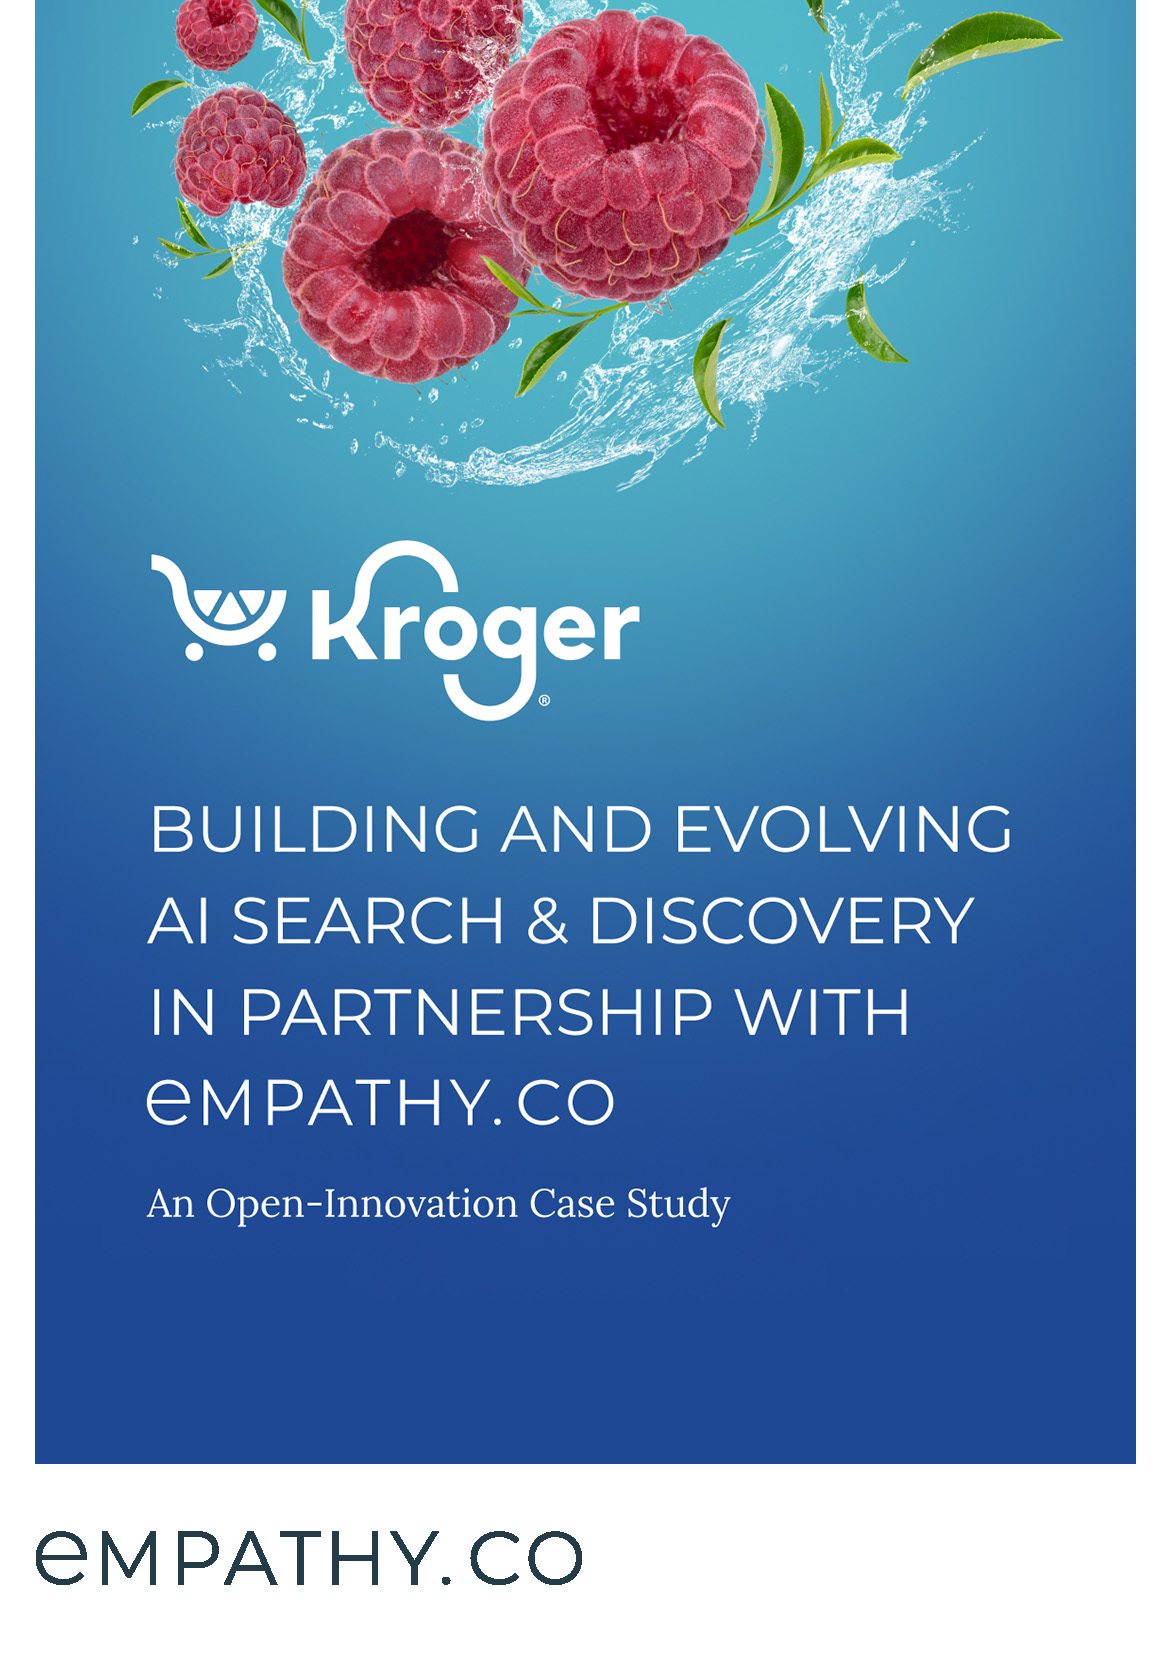 Kroger: Building and evolving AI Search Discovery